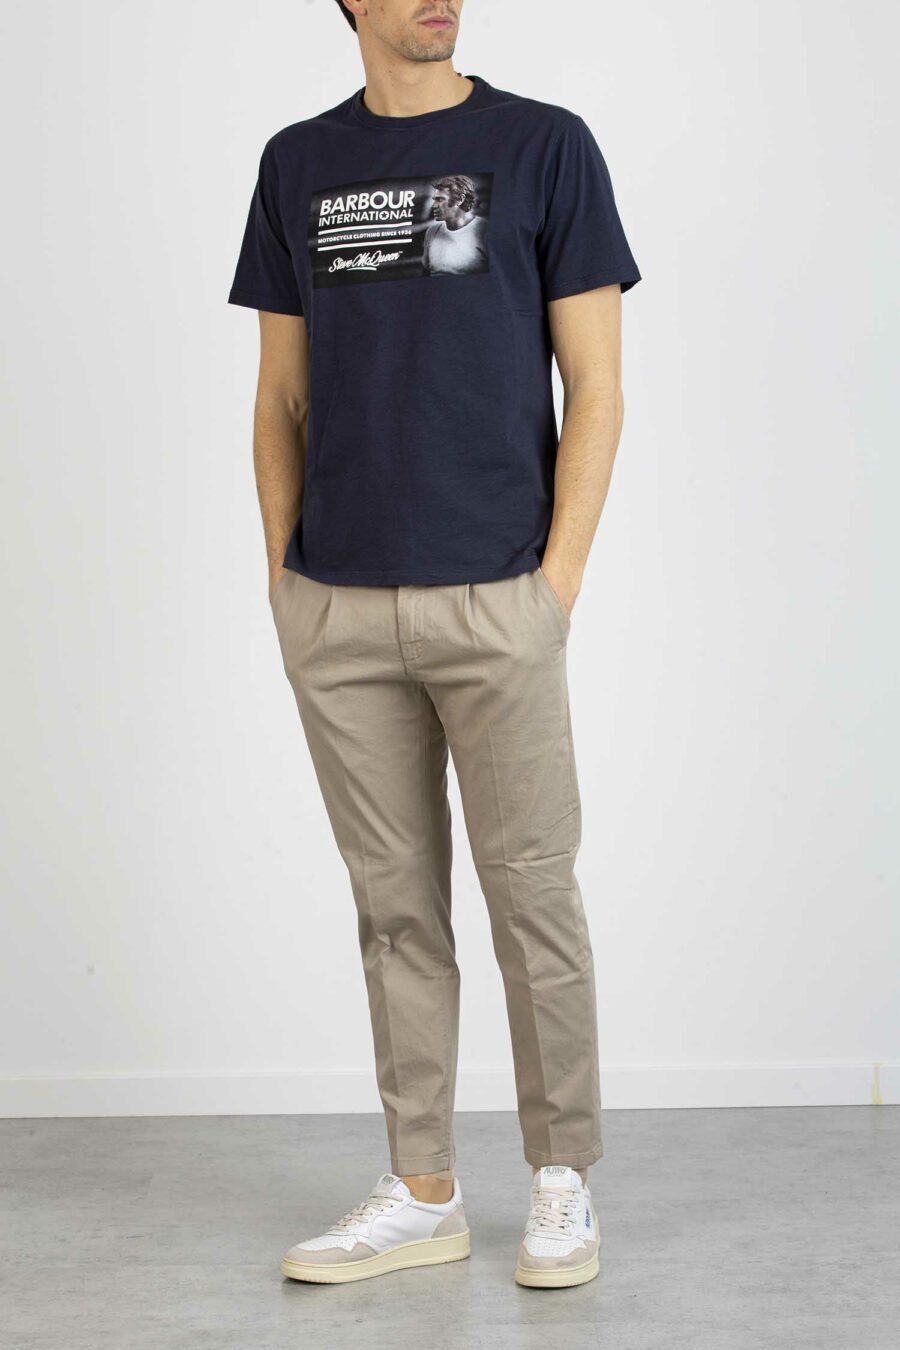 BARBOUR-T.SHIRT STAMPA-BBMTS0931 BLU